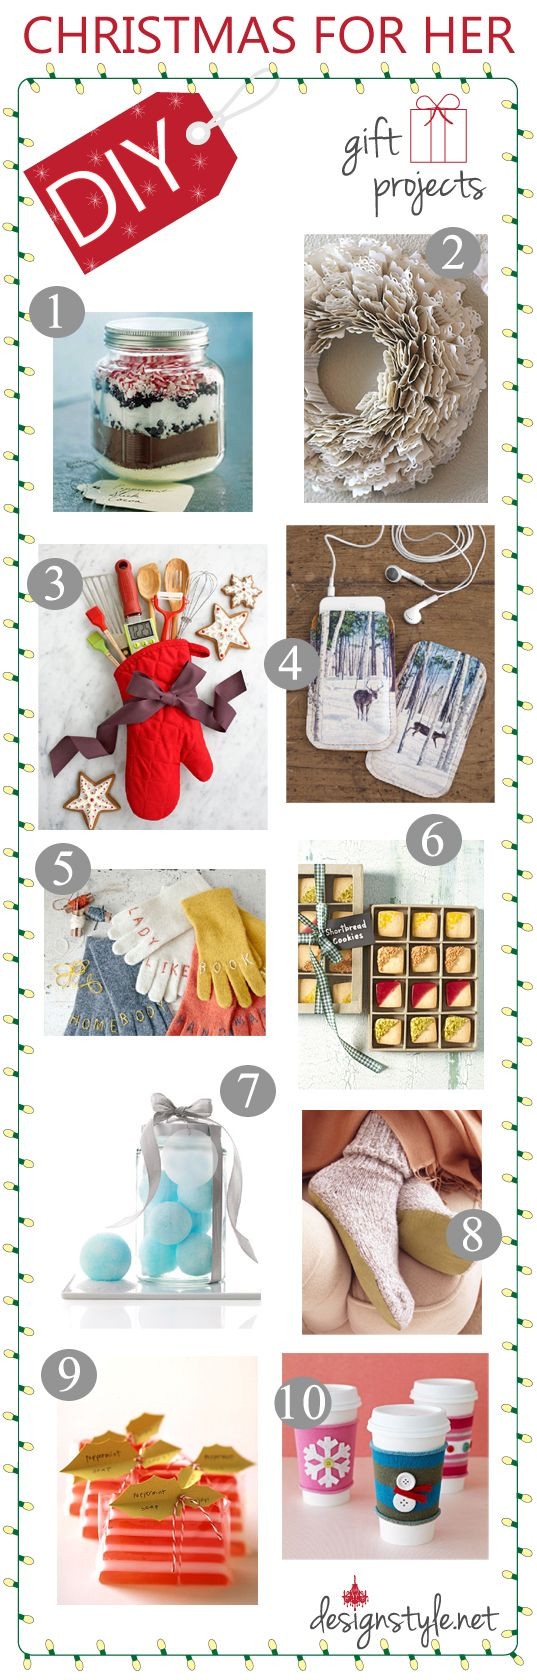 DIY Gift Baskets For Her
 DIY Christmas Gift Ideas For Her & Him